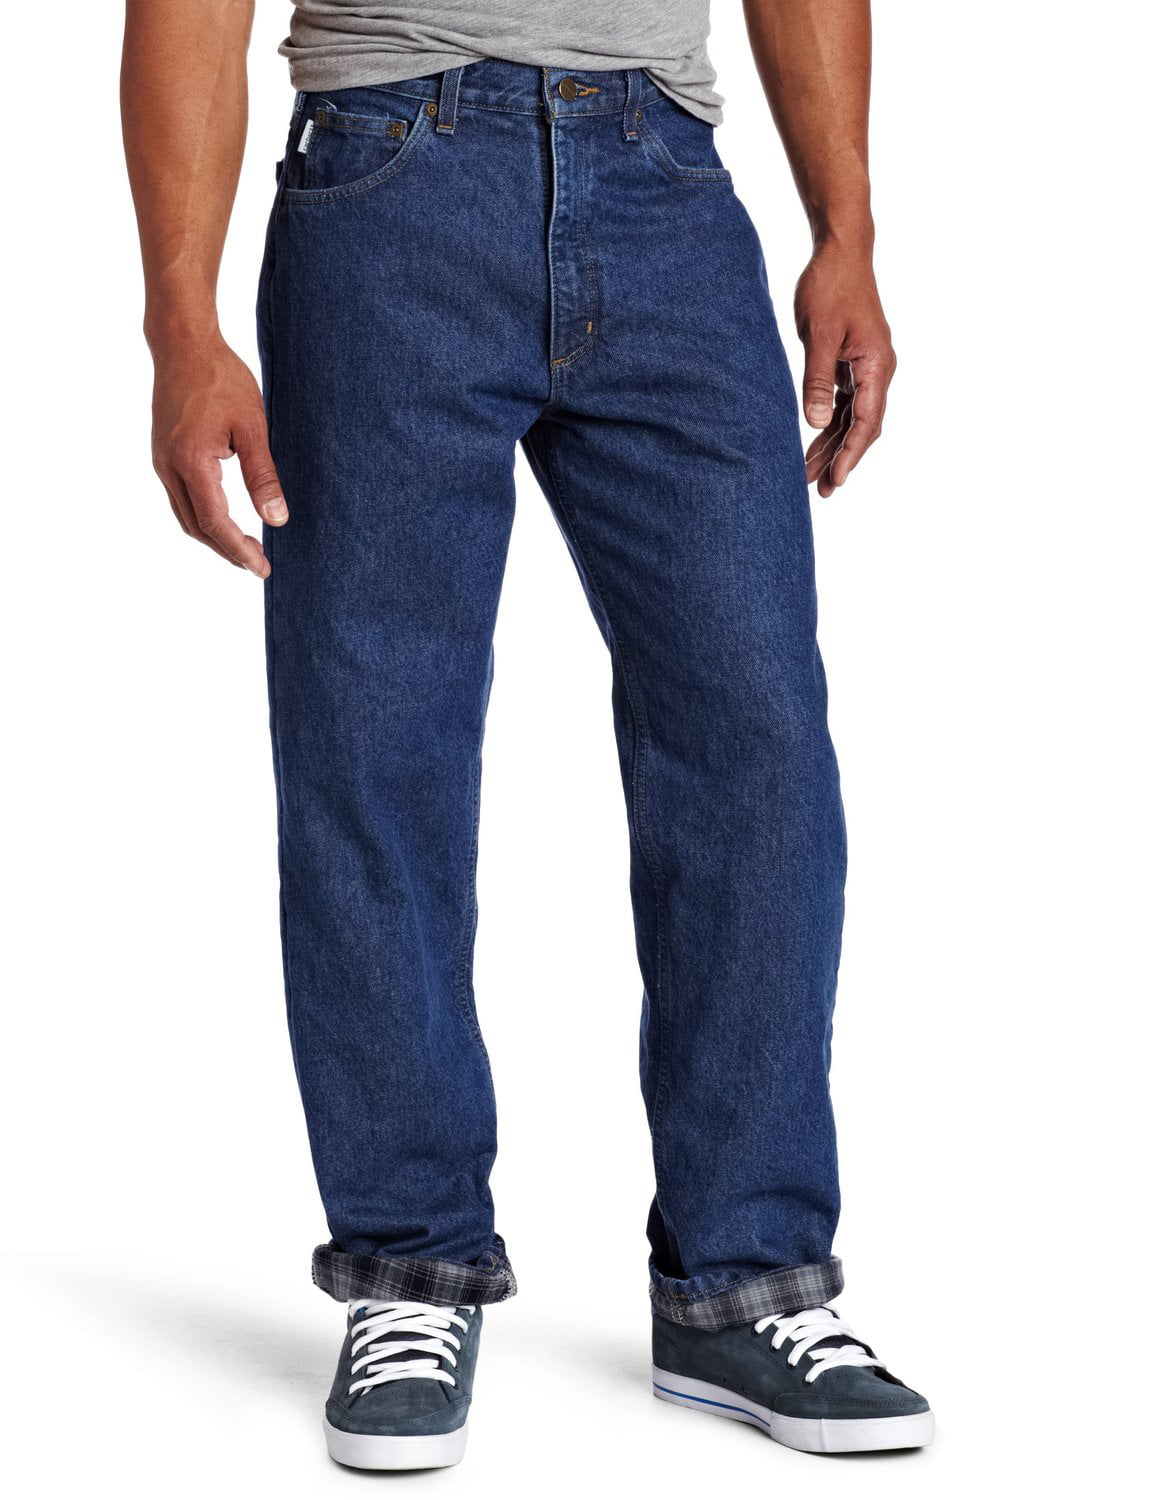 Carhartt Mens Relaxed Fit Straight Leg Flannel Lined Jean Online ...